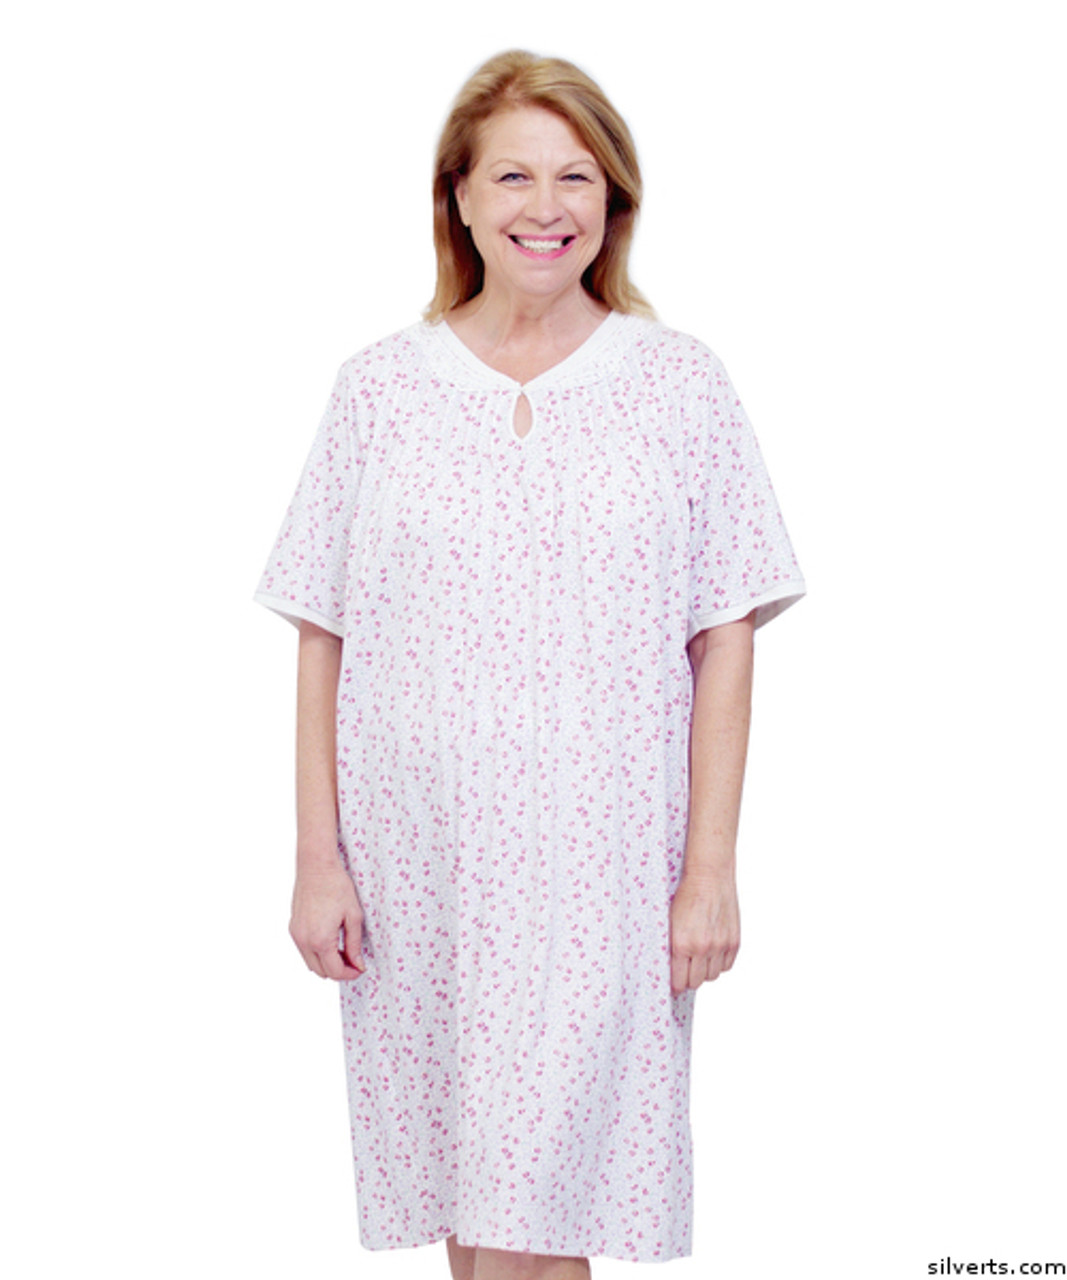 42 Best Hospital gown ideas | hospital gown, hospital gown pattern, hospital